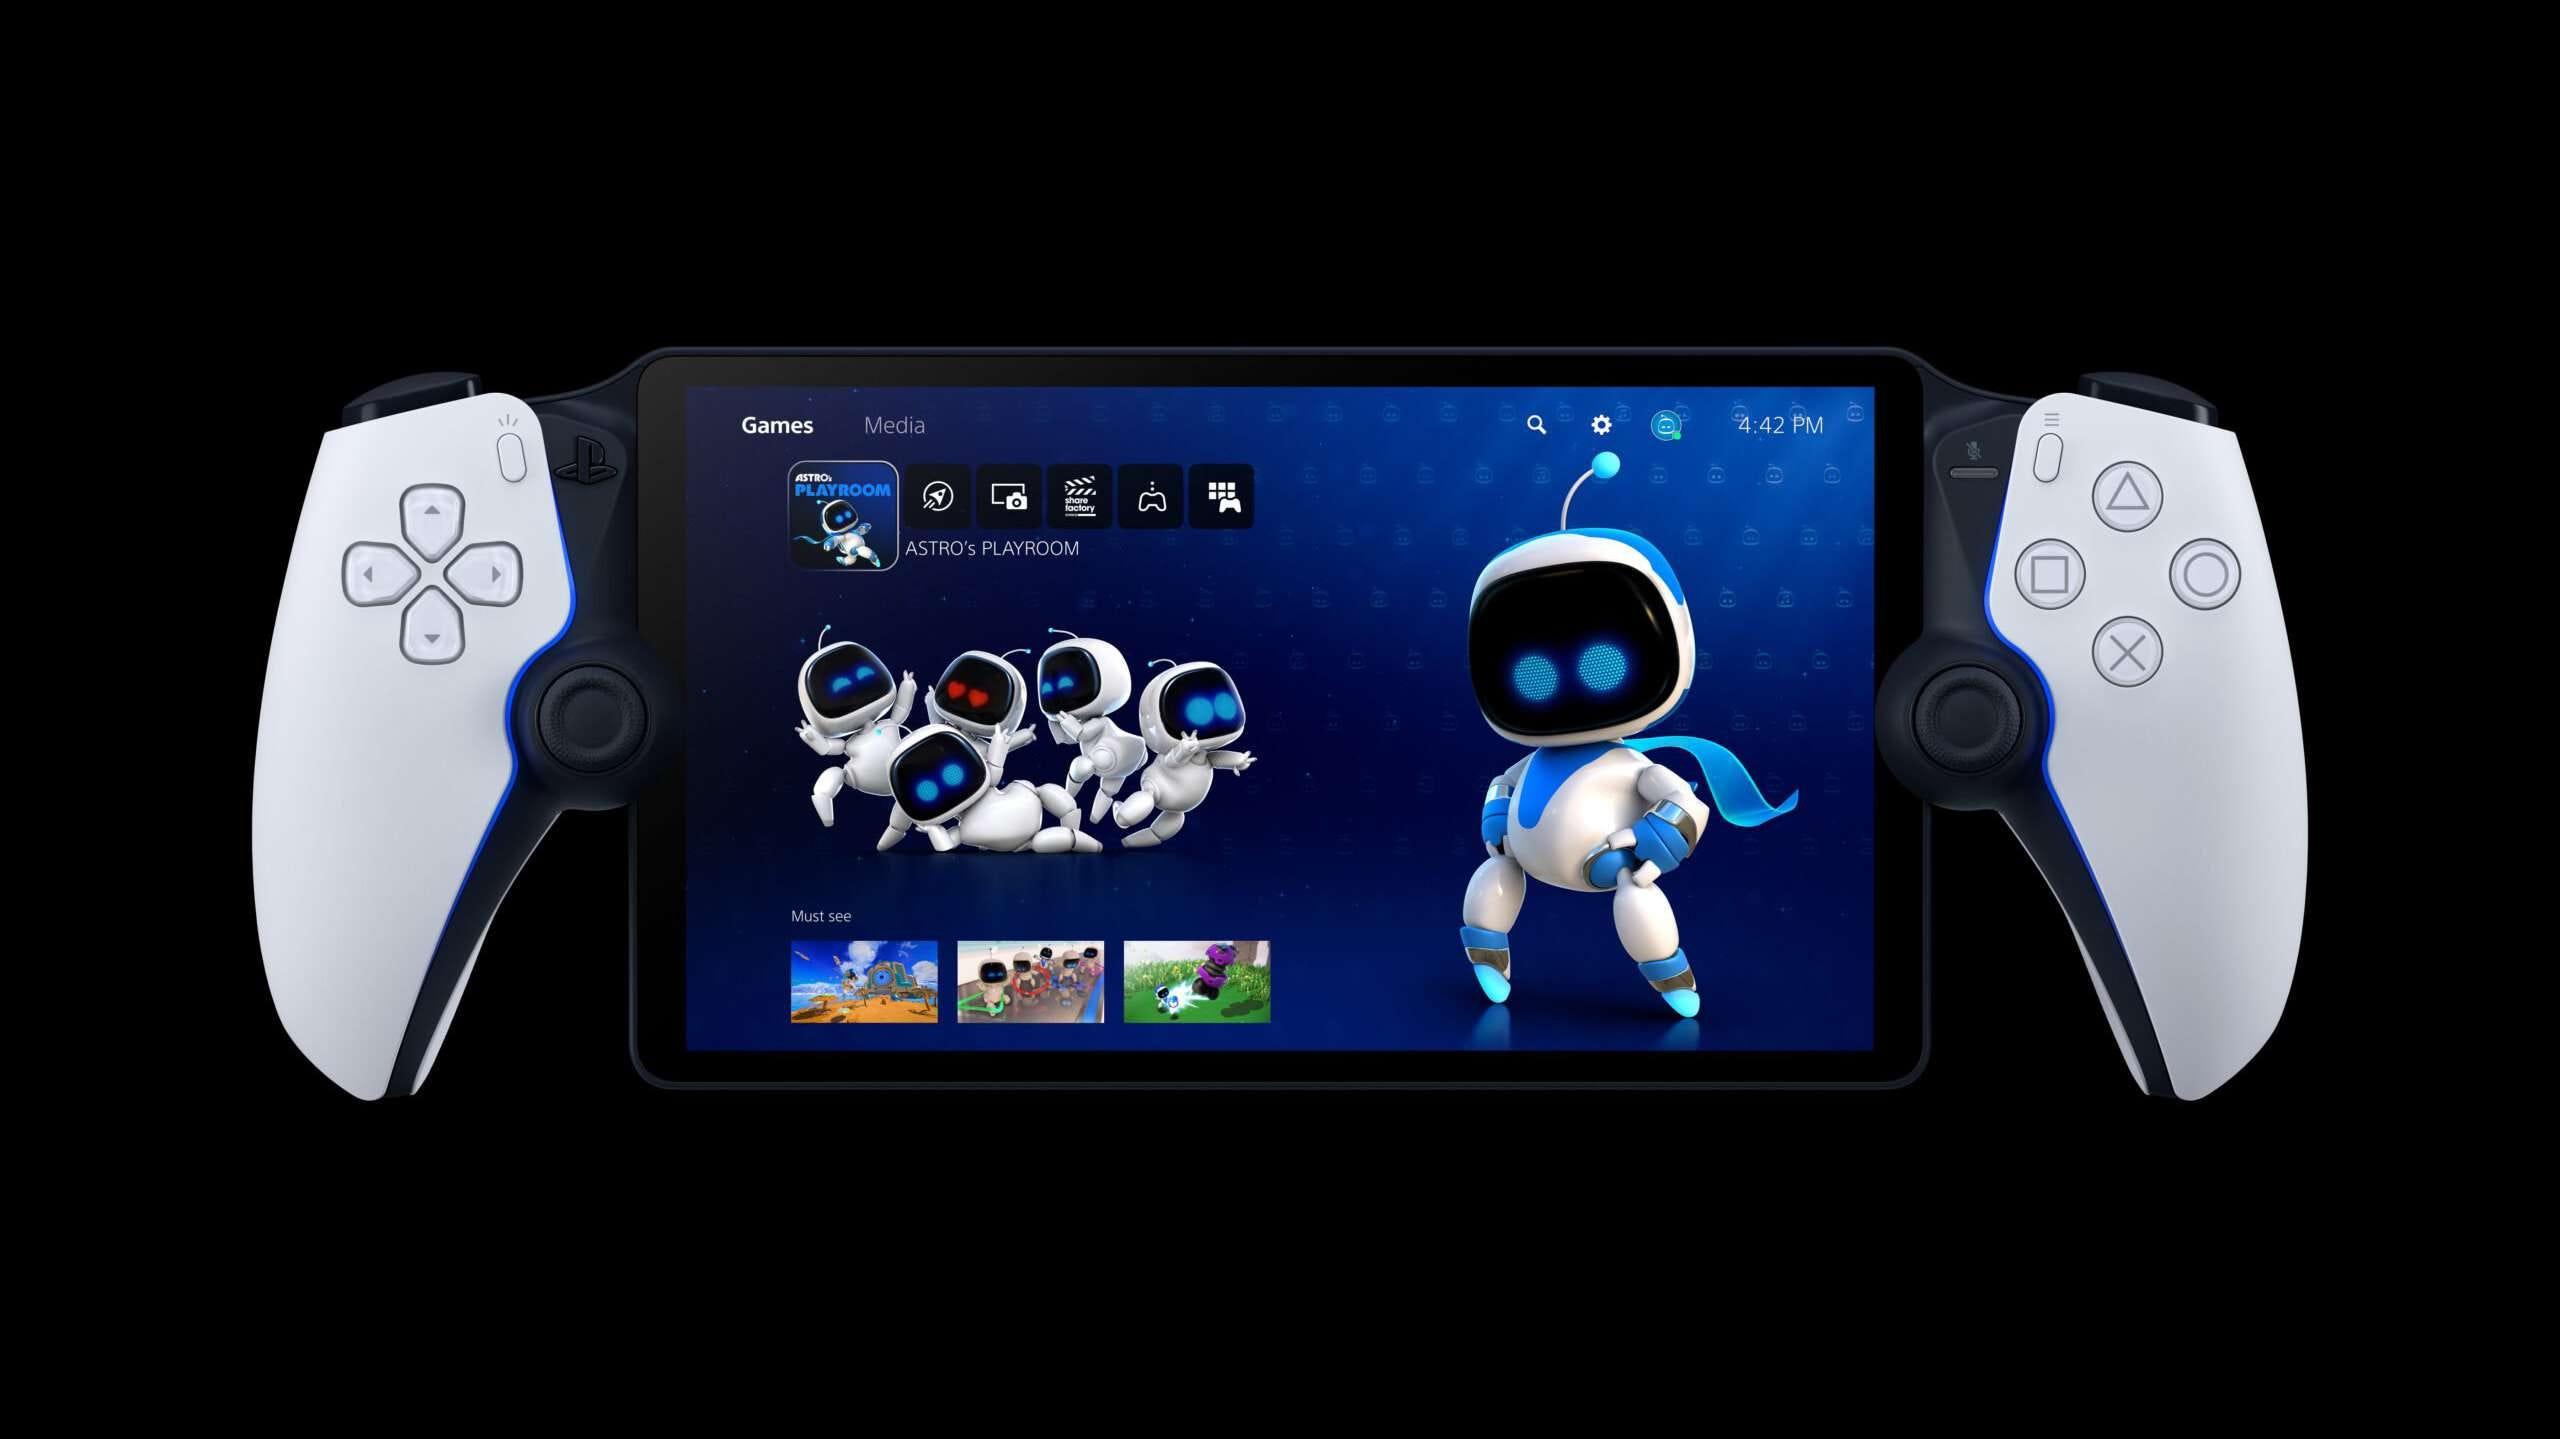 Why I bought the PlayStation Portal even though its not the Sony